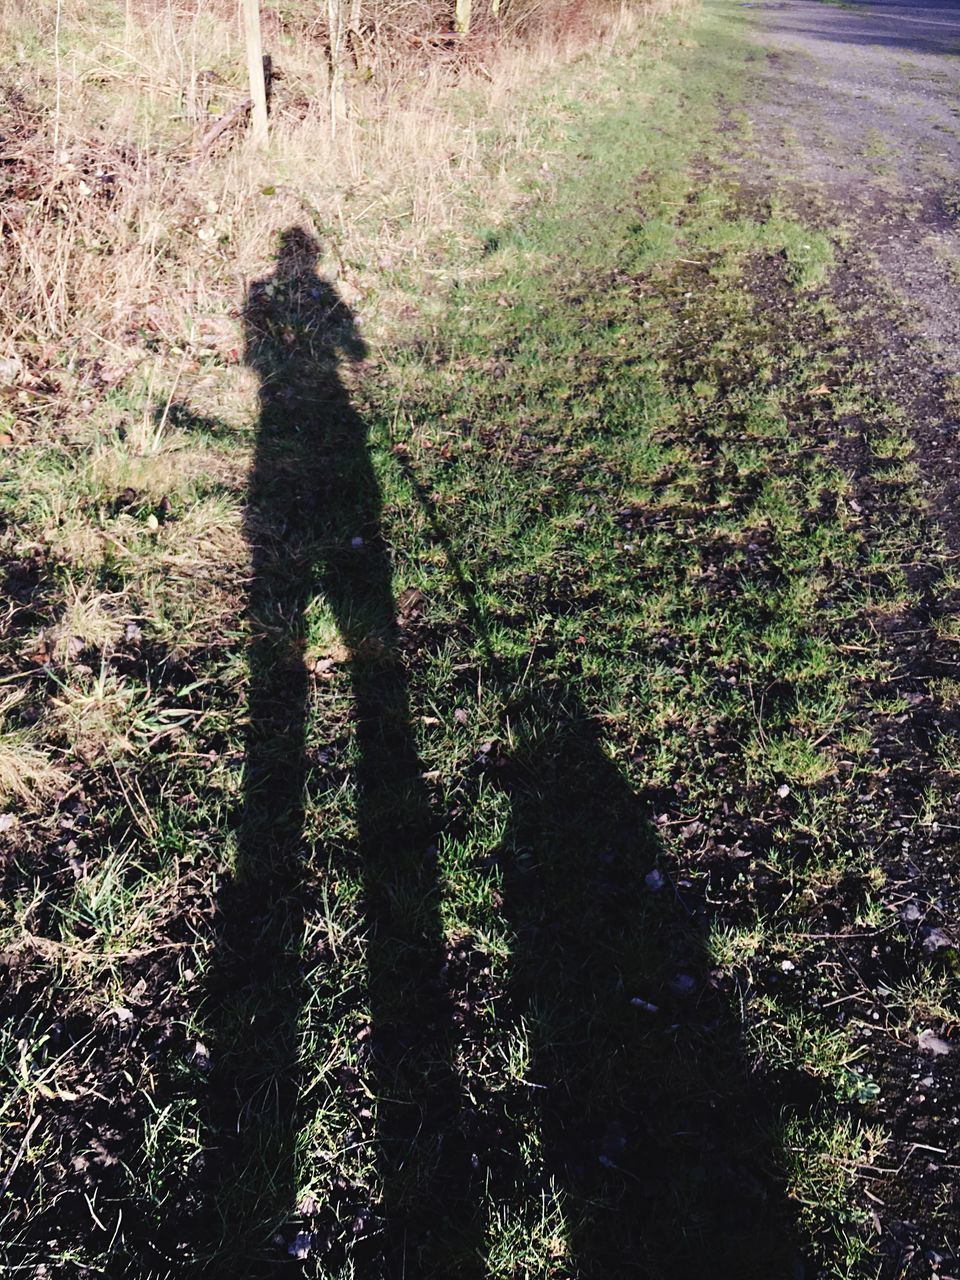 shadow, focus on shadow, grass, sunlight, high angle view, field, growth, unrecognizable person, nature, tranquility, tree, tree trunk, lifestyles, leisure activity, outdoors, grassy, day, silhouette